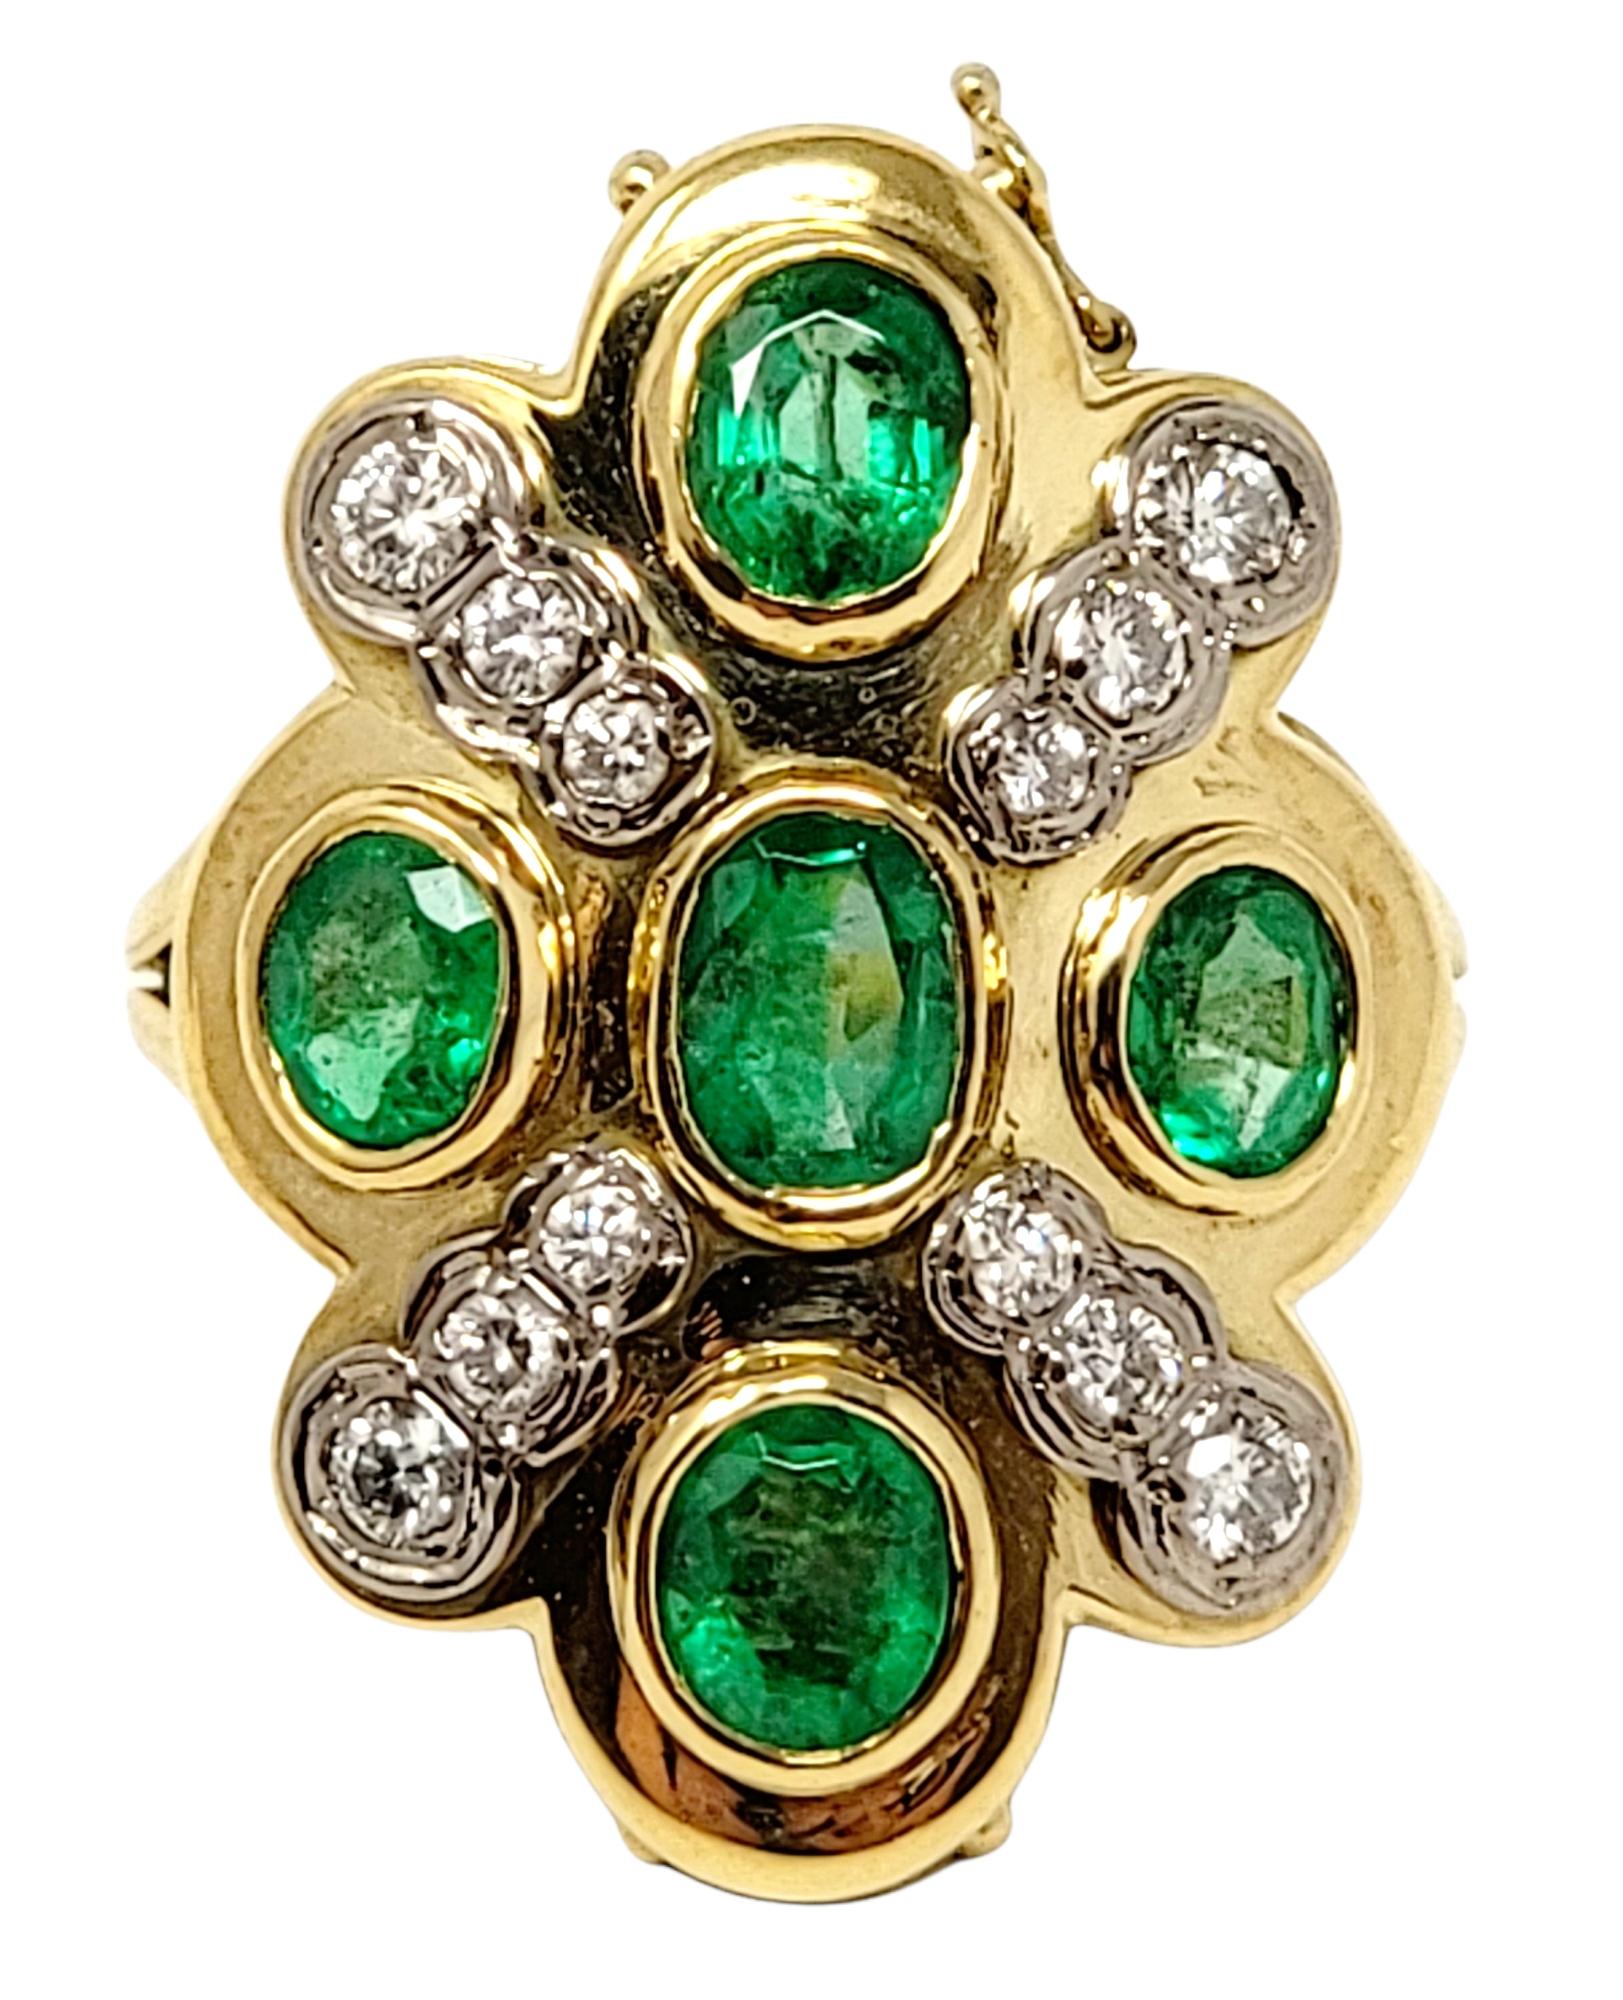 Ring size: 7

Stunning 18 karat yellow gold emerald and diamond cocktail ring is substantial in size and offers a stunning pop of color as it fills the finger. This unique piece can also detach from the ring base and be worn alone as a pendant